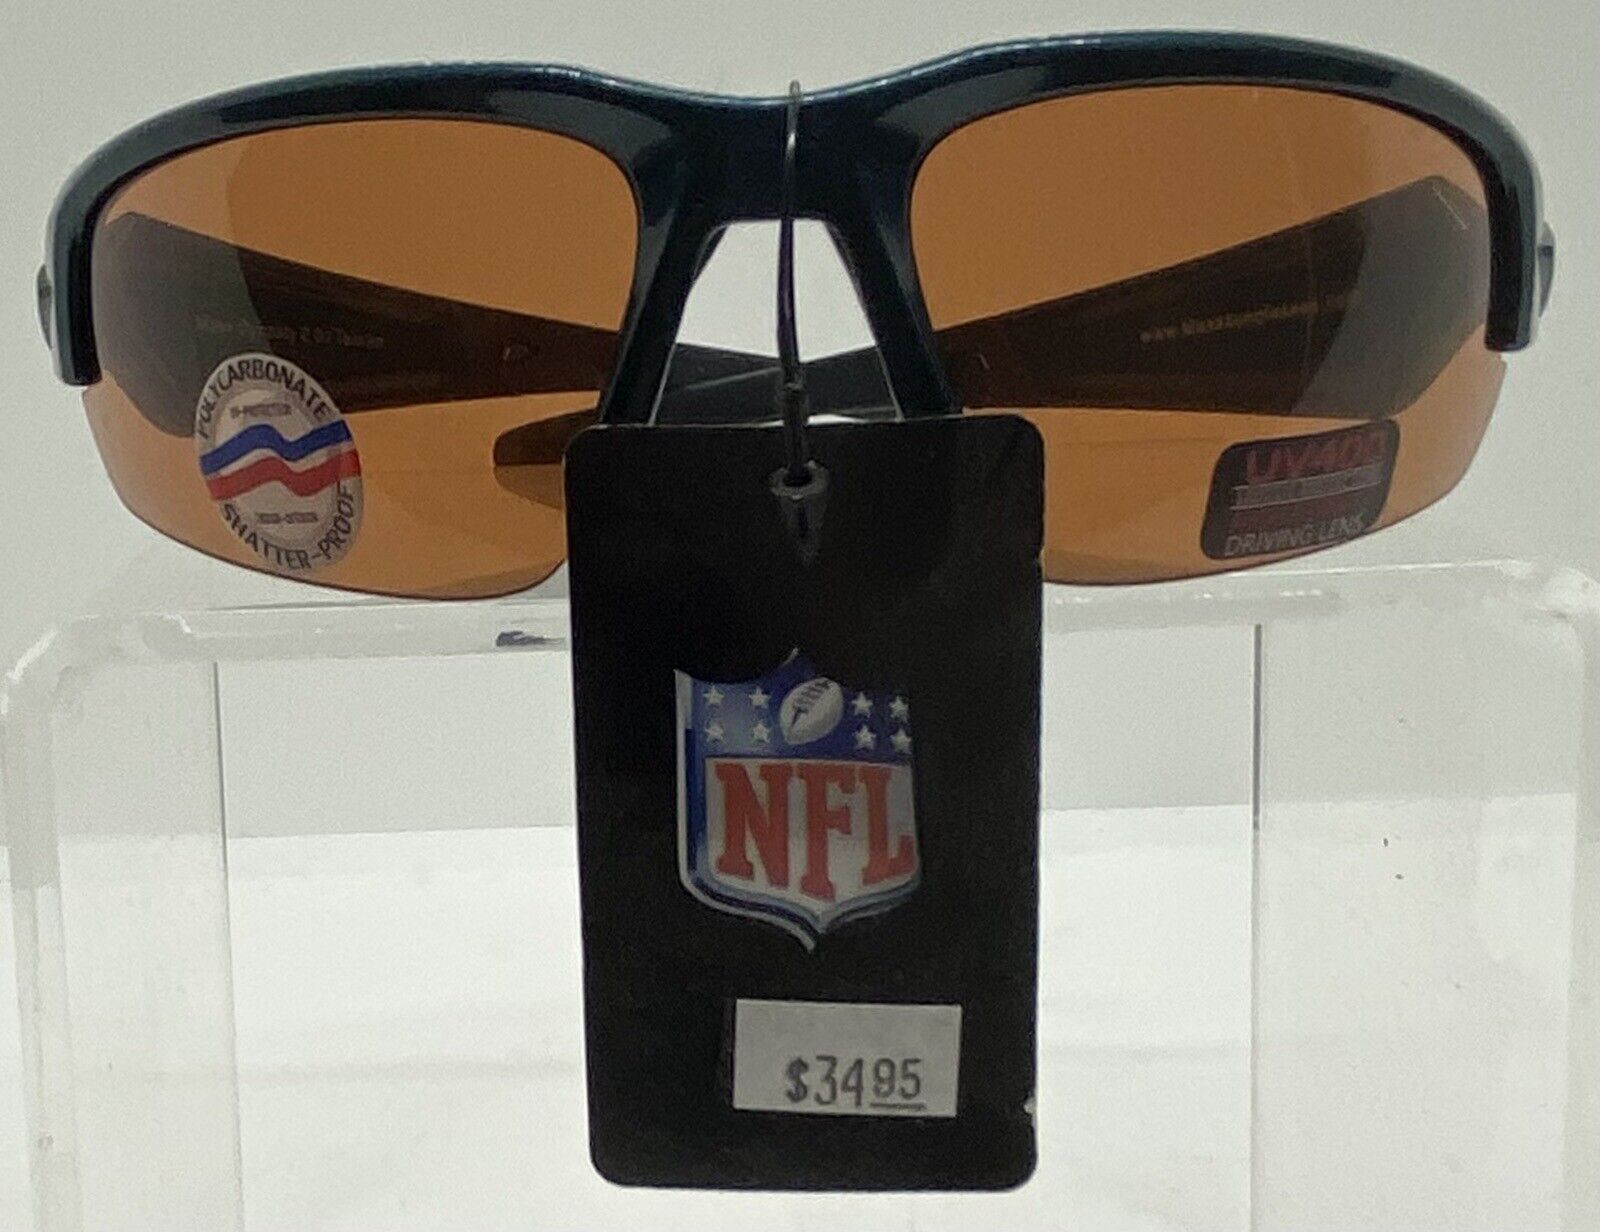 Maxx NFL Eagles Driving Sunglasses UV 400 Shatter Proof Old New Stock New NWT